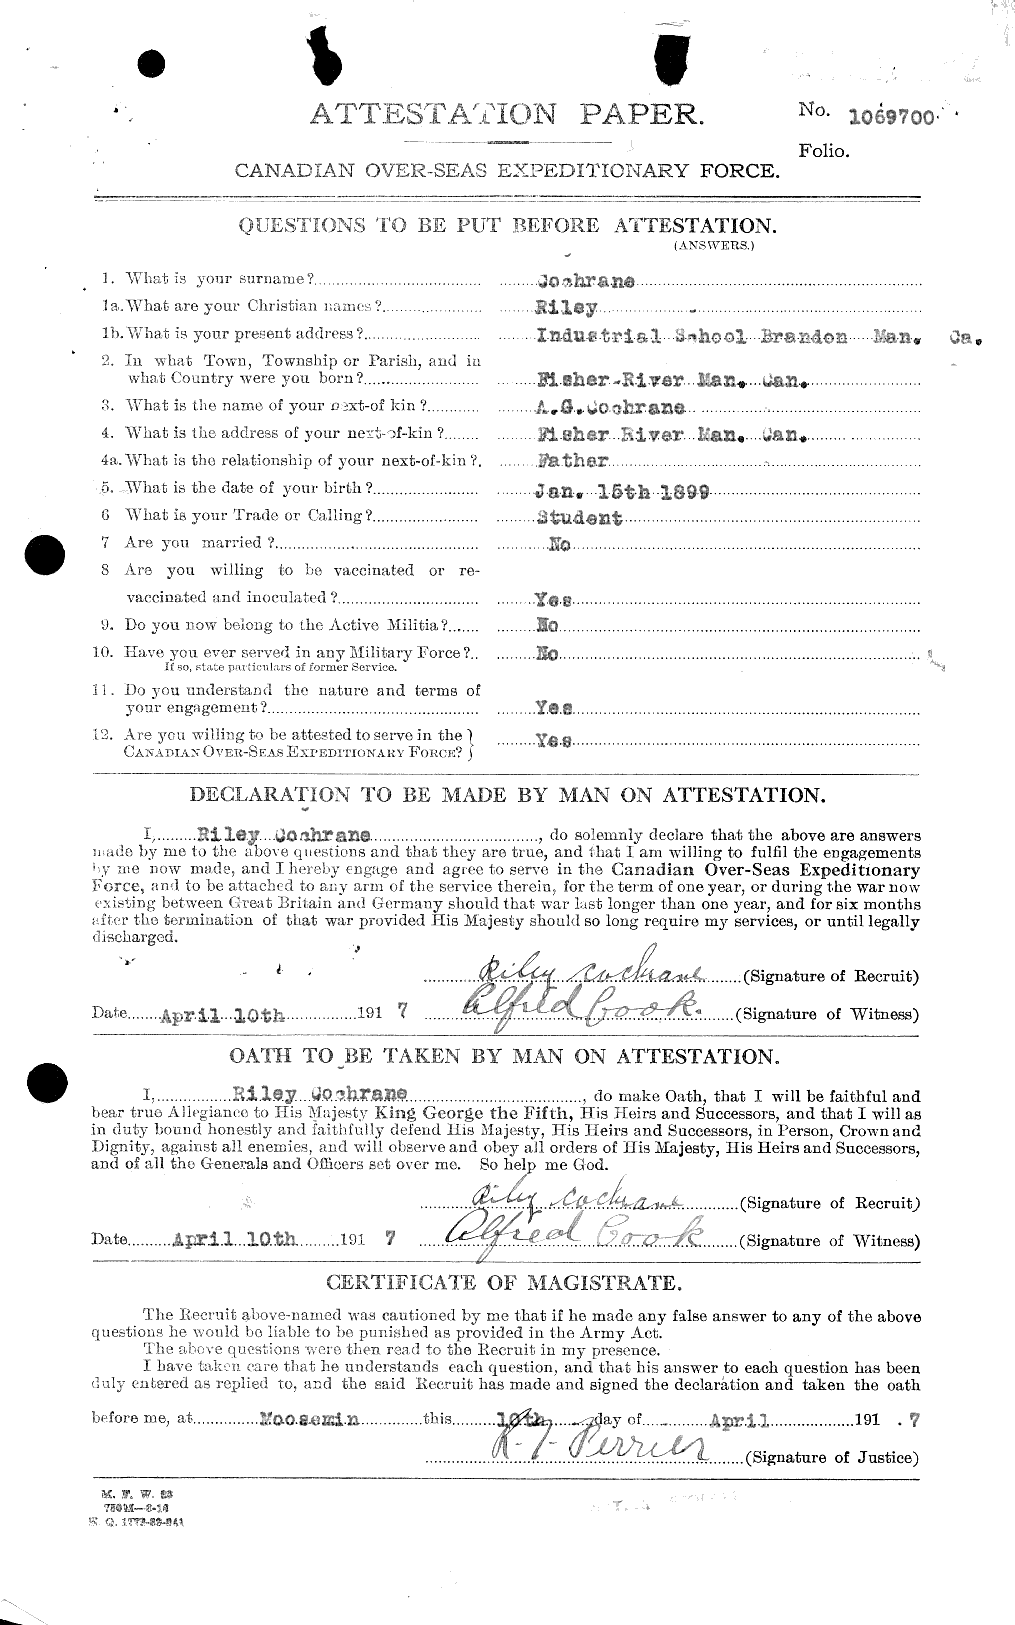 Personnel Records of the First World War - CEF 026448a